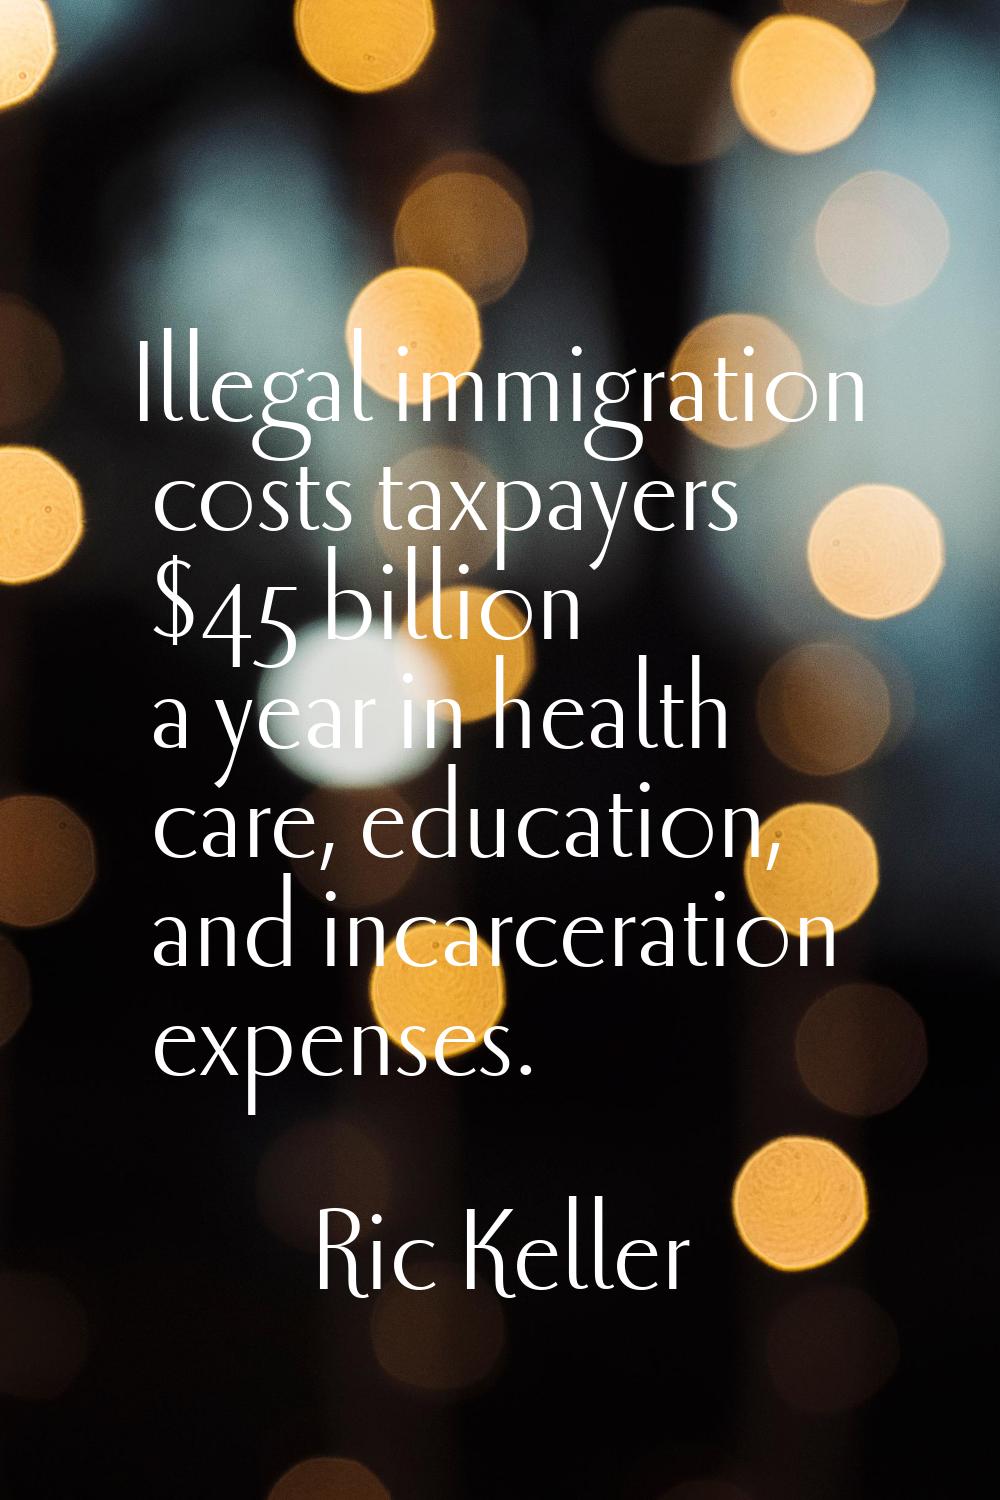 Illegal immigration costs taxpayers $45 billion a year in health care, education, and incarceration